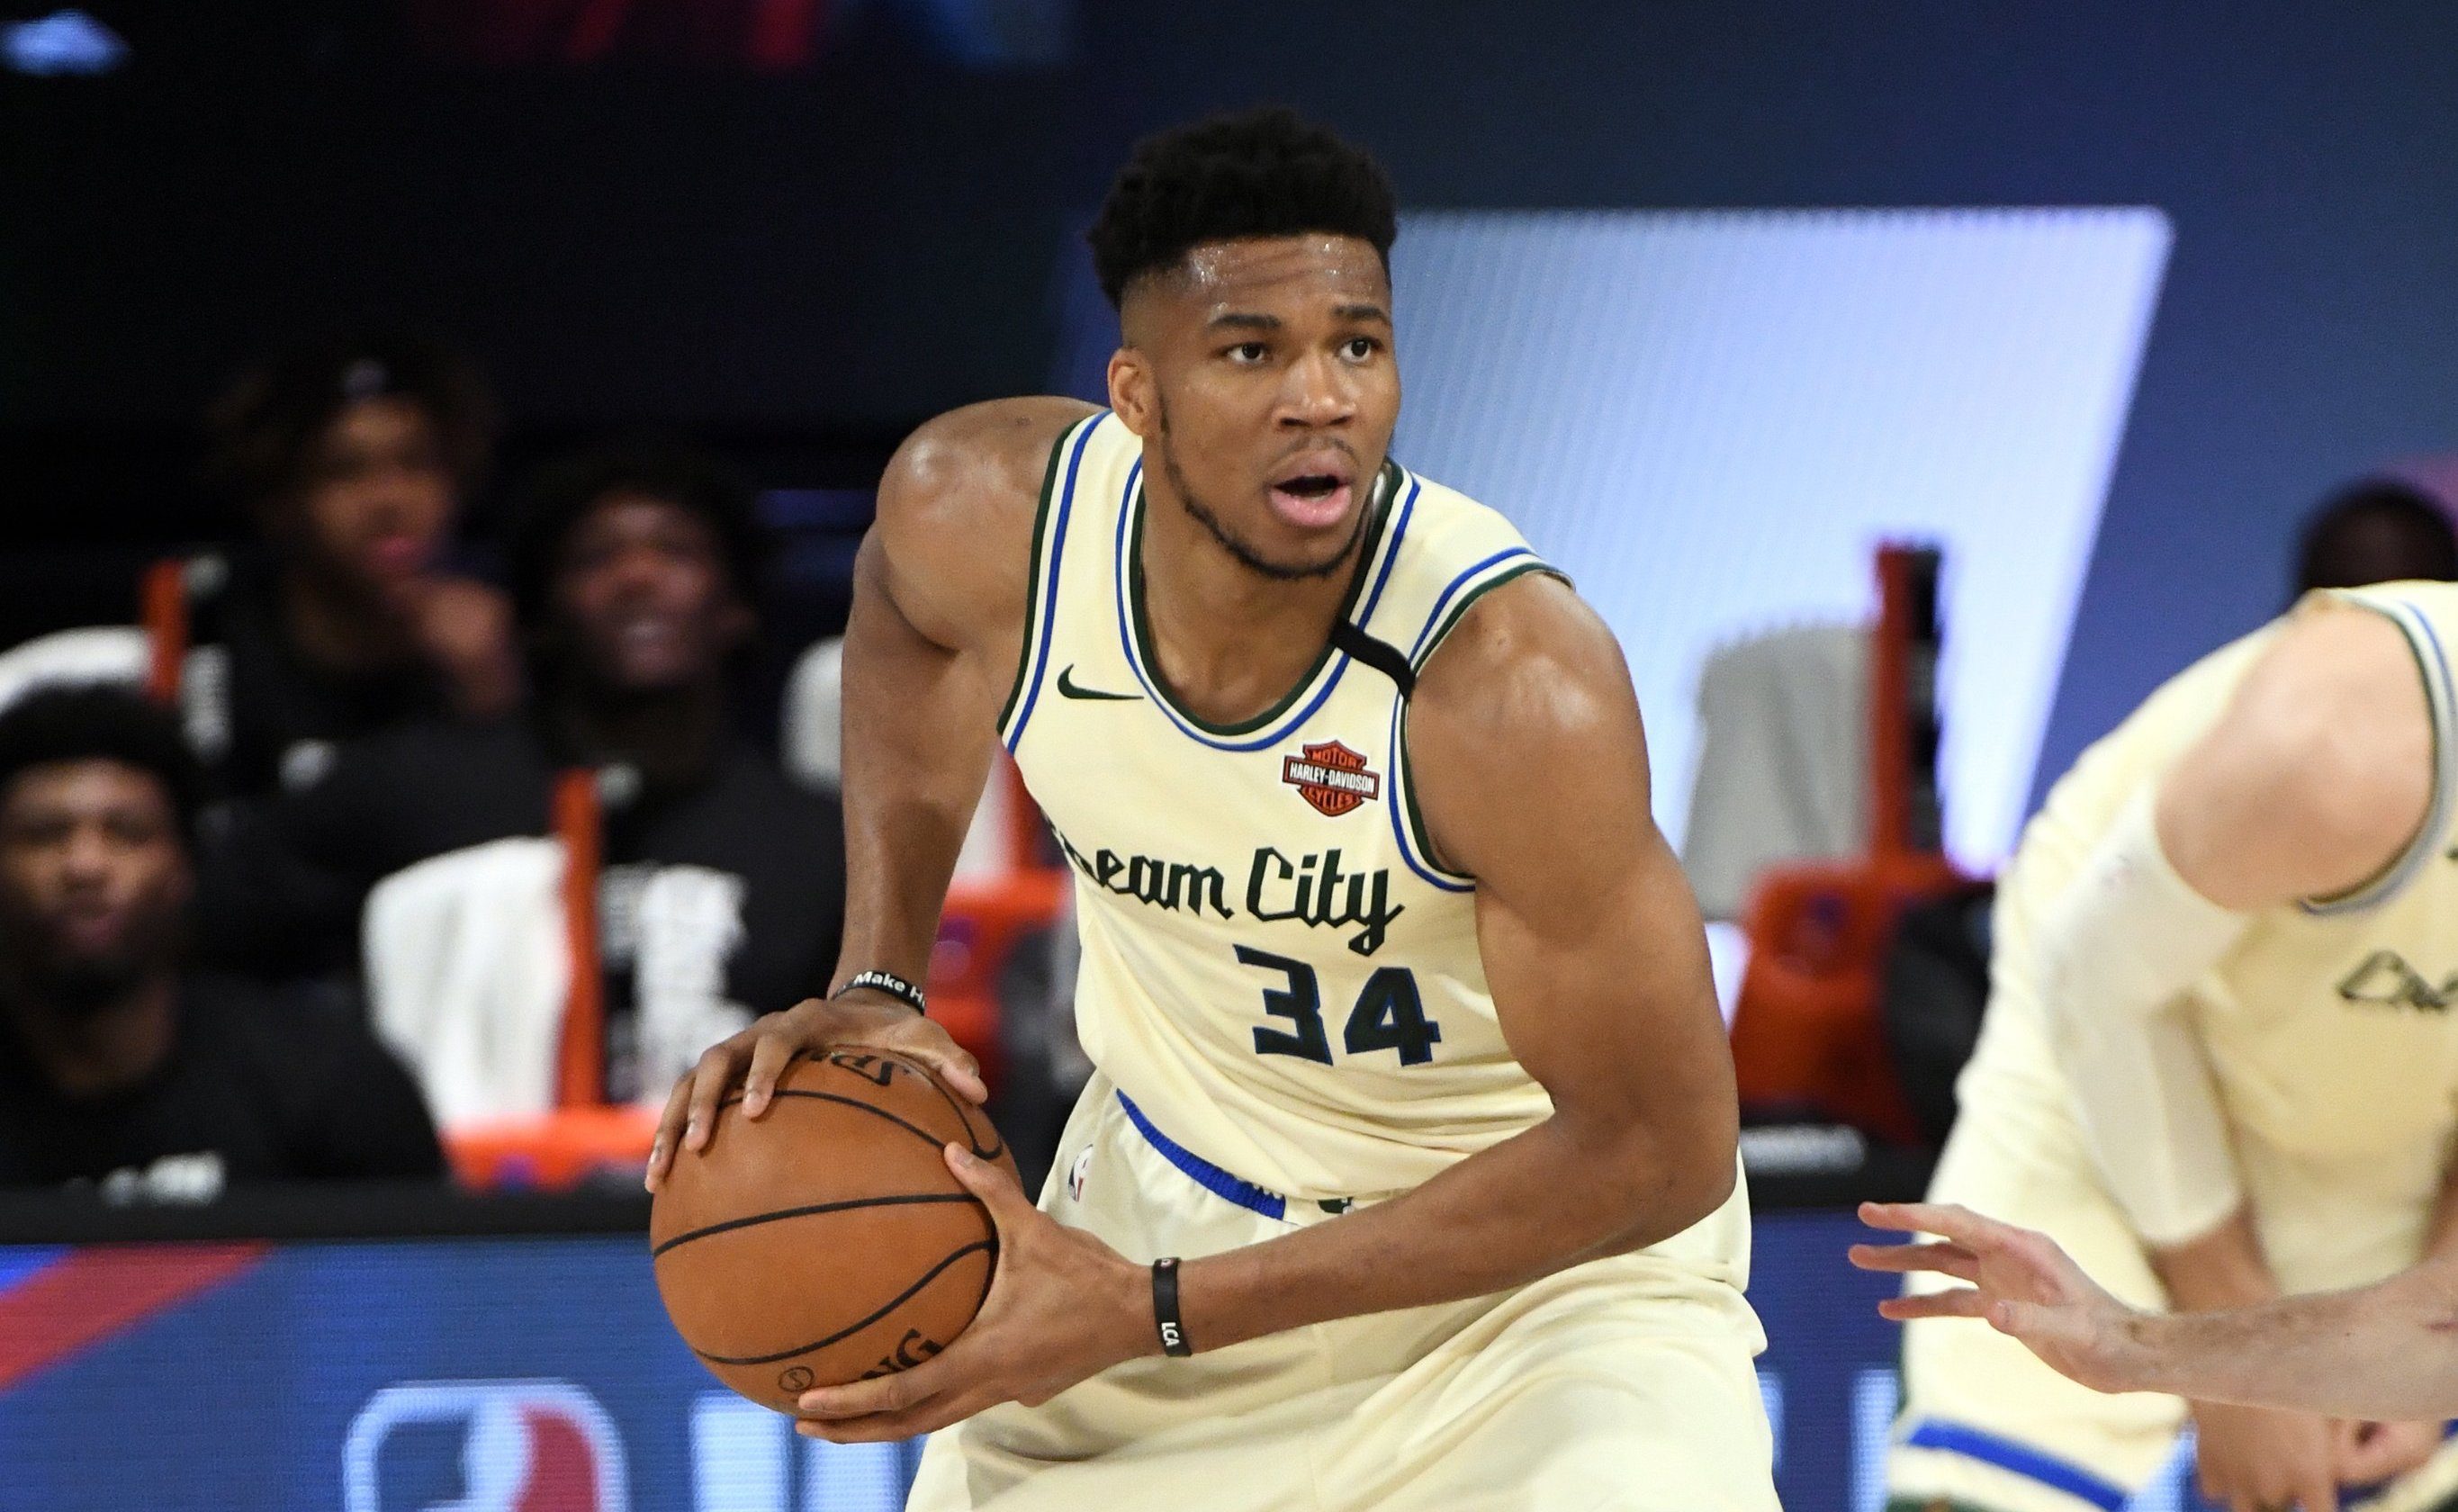 Giannis Antetokounmpo stars in NBA ad for Chinese New Year